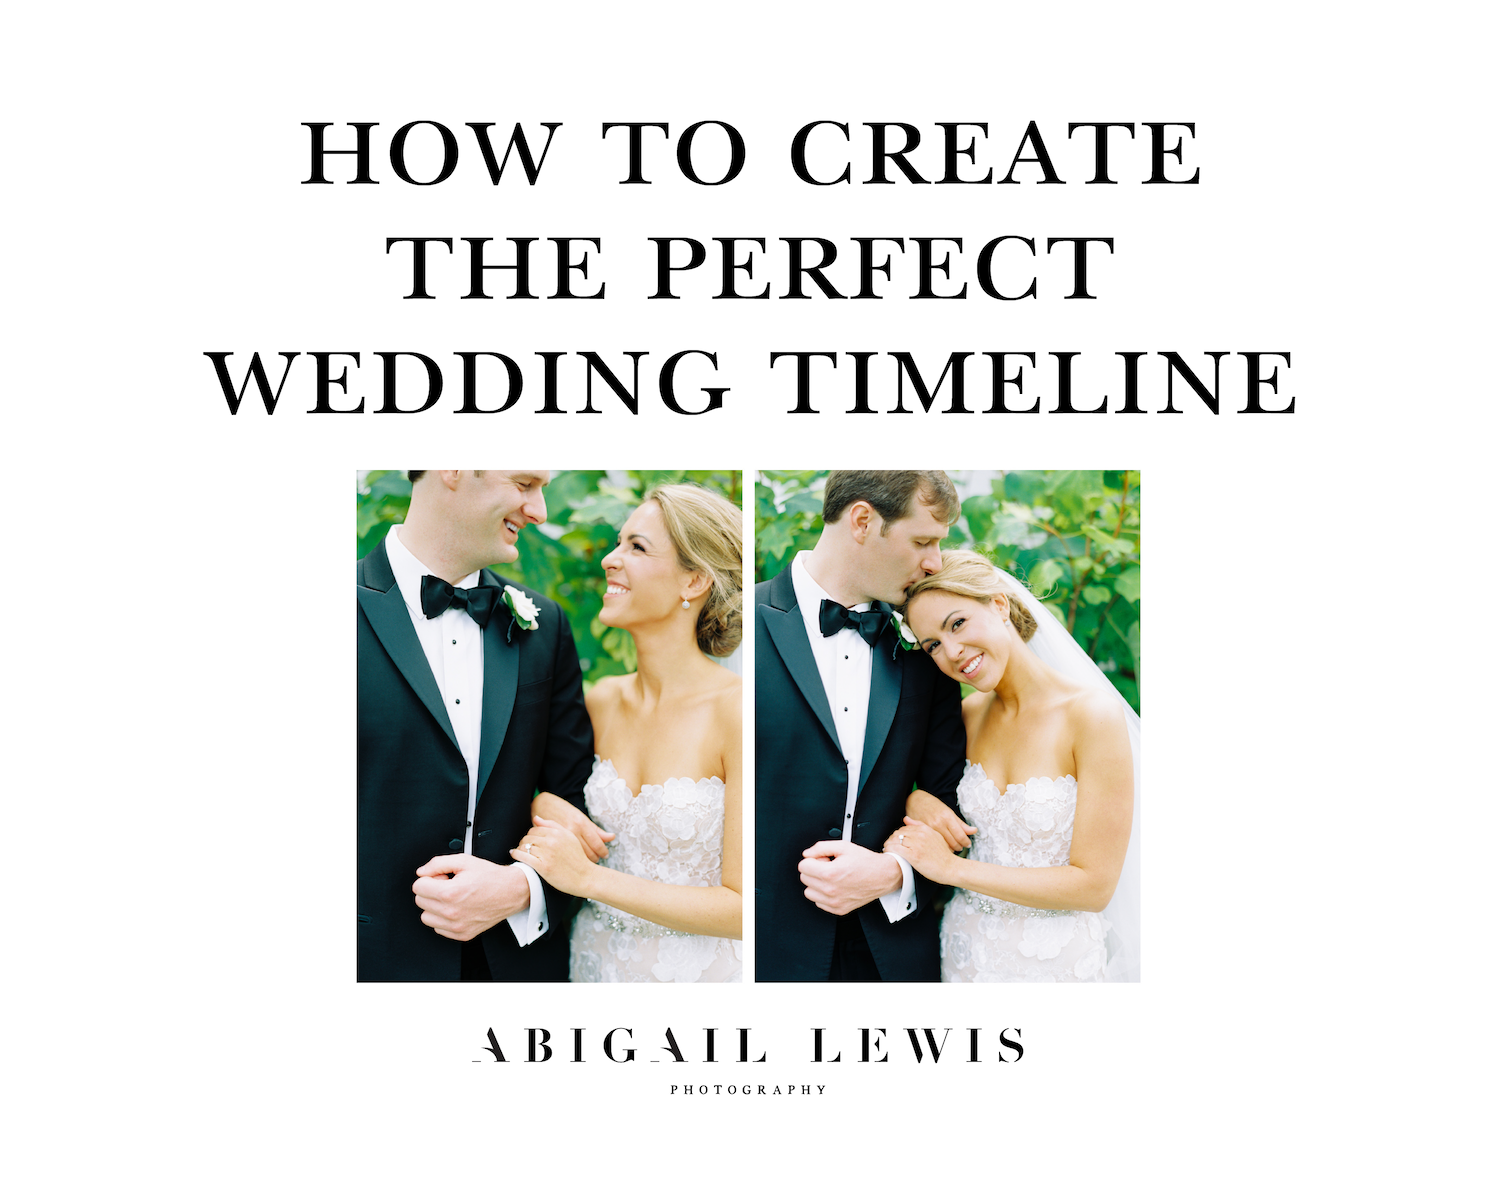 How to create the perfect wedding timeline for your wedding day